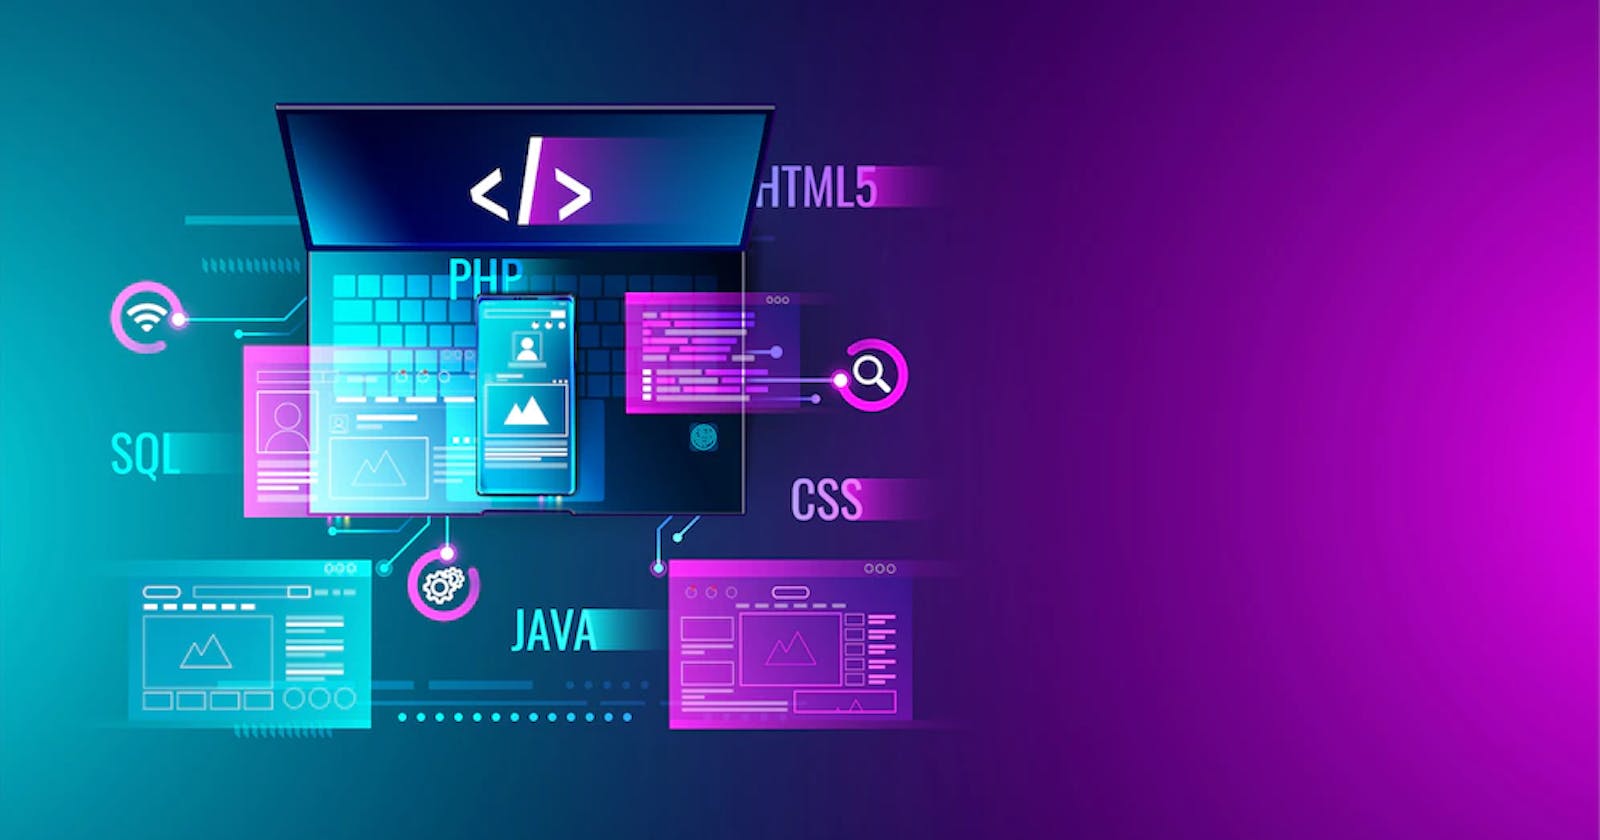 Why Use Angular for Web Application Development